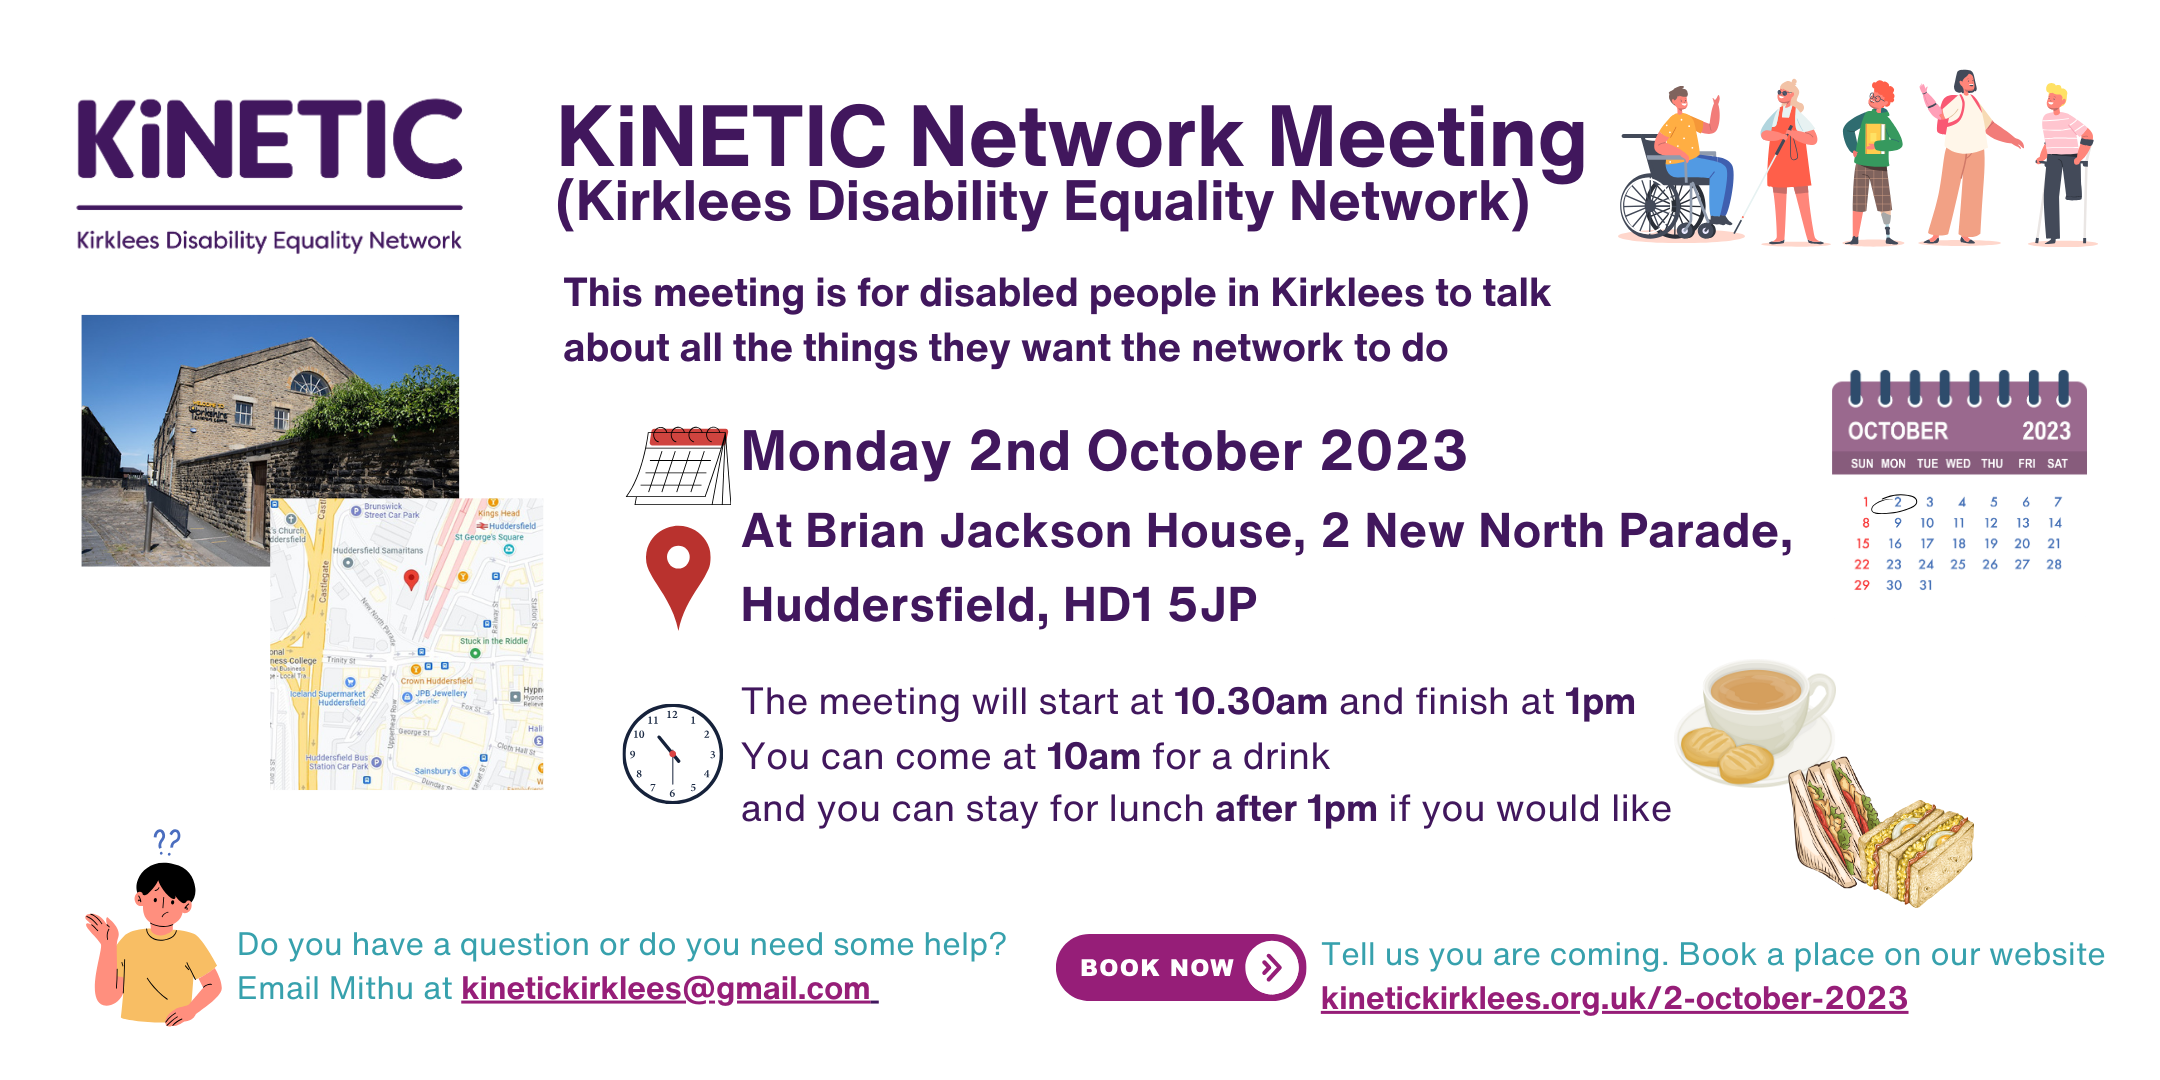 'easy read' summary of the key details of the KiNETIC Network meeting on 2nd October 2023, including date, time, location and booking links, with illustrative icons.